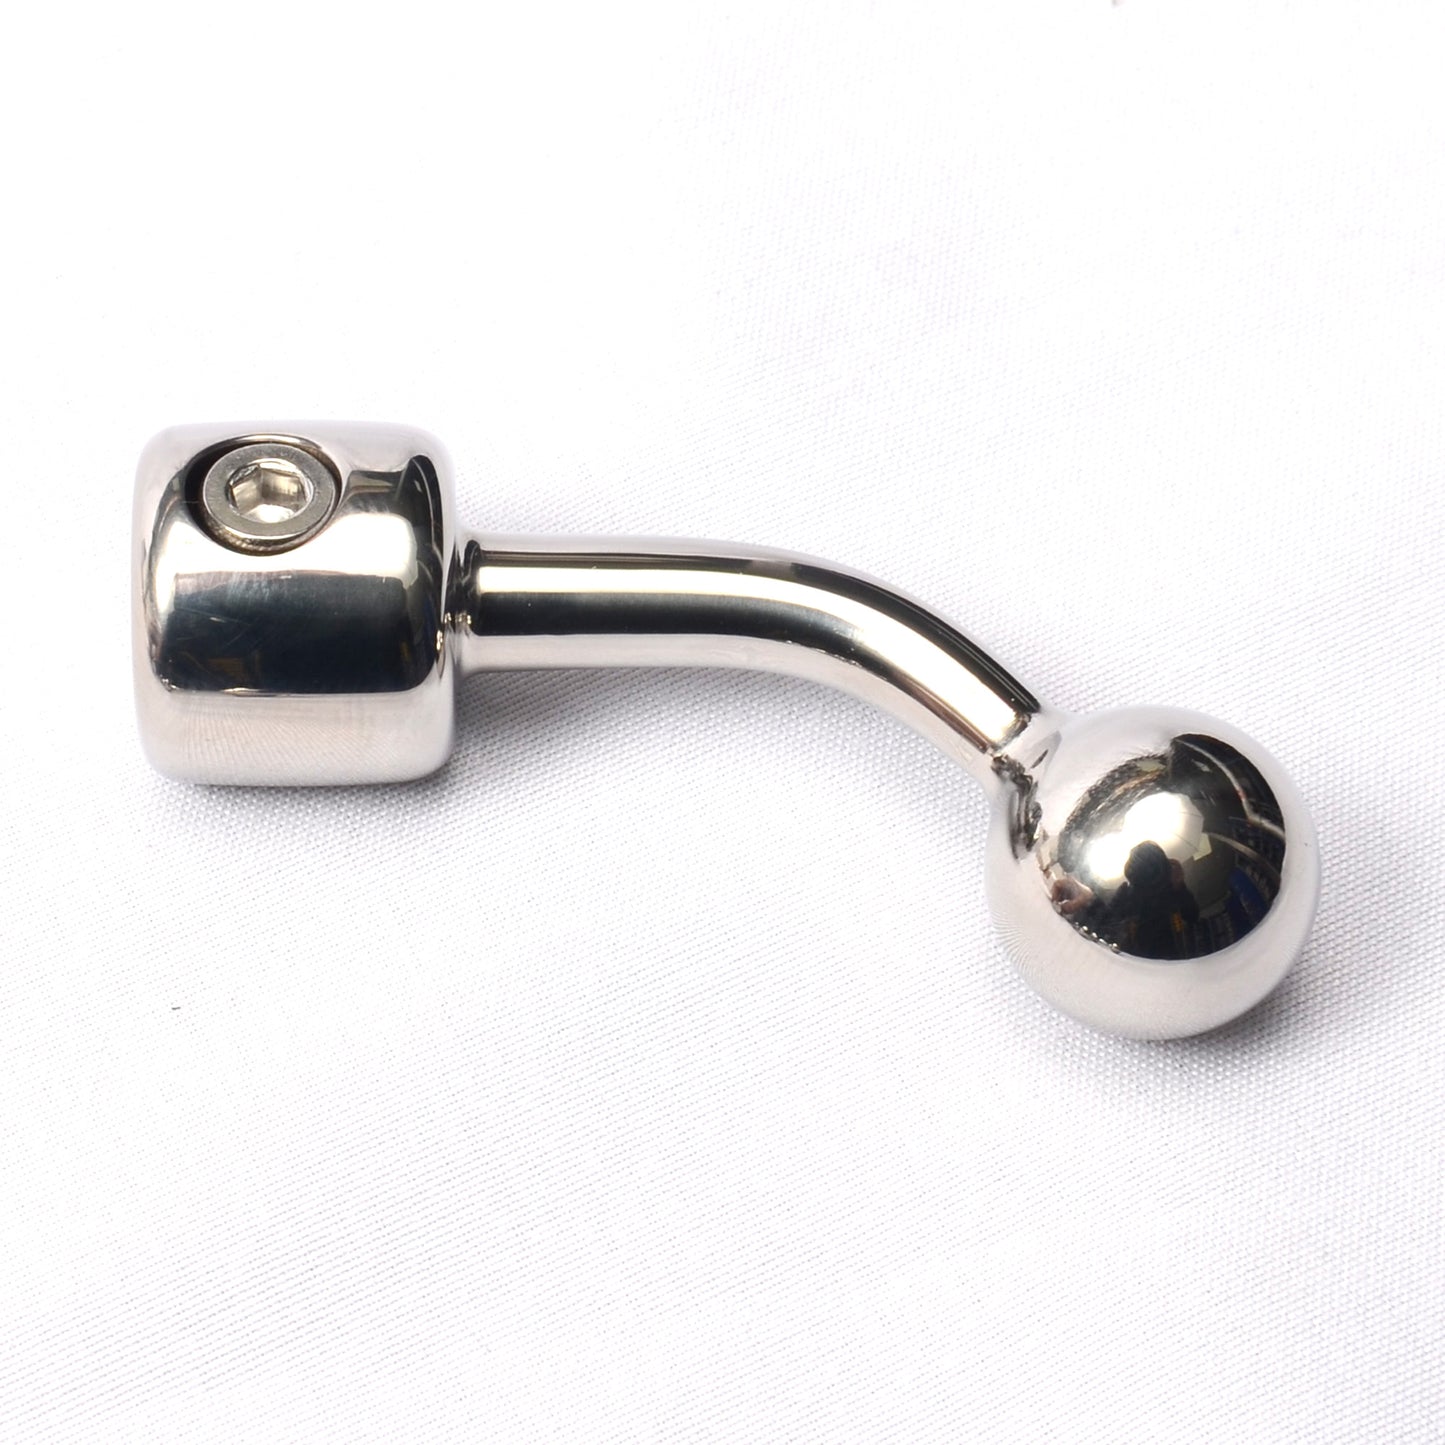 S400/S410 Bolt handle - Stainless Steel